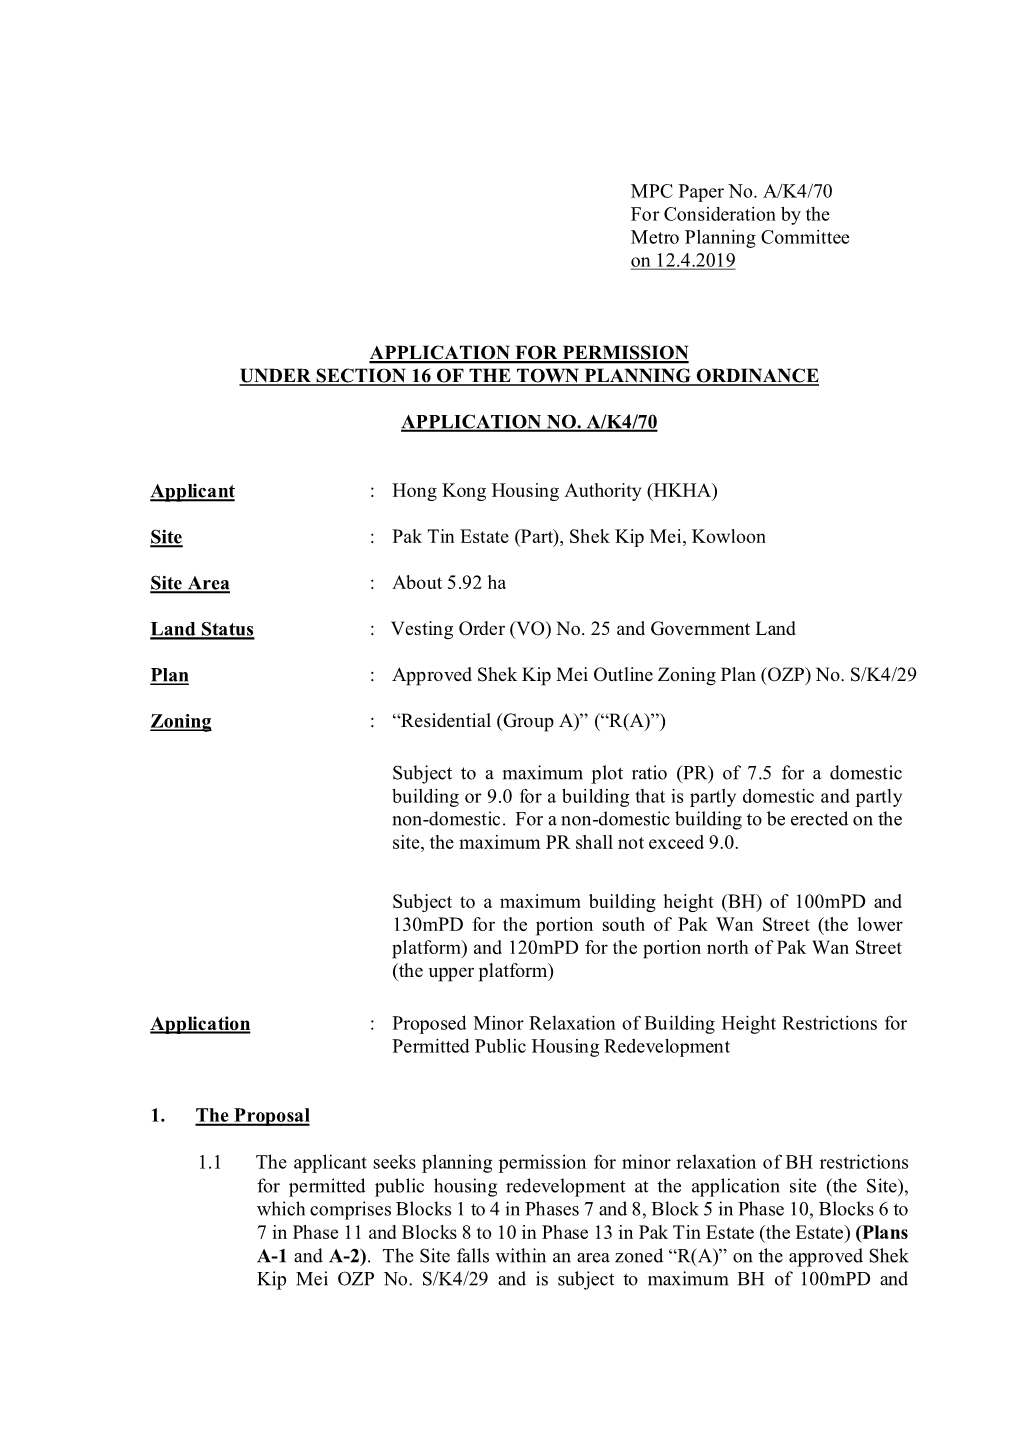 MPC Paper No. A/K4/70 for Consideration by the Metro Planning Committee on 12.4.2019